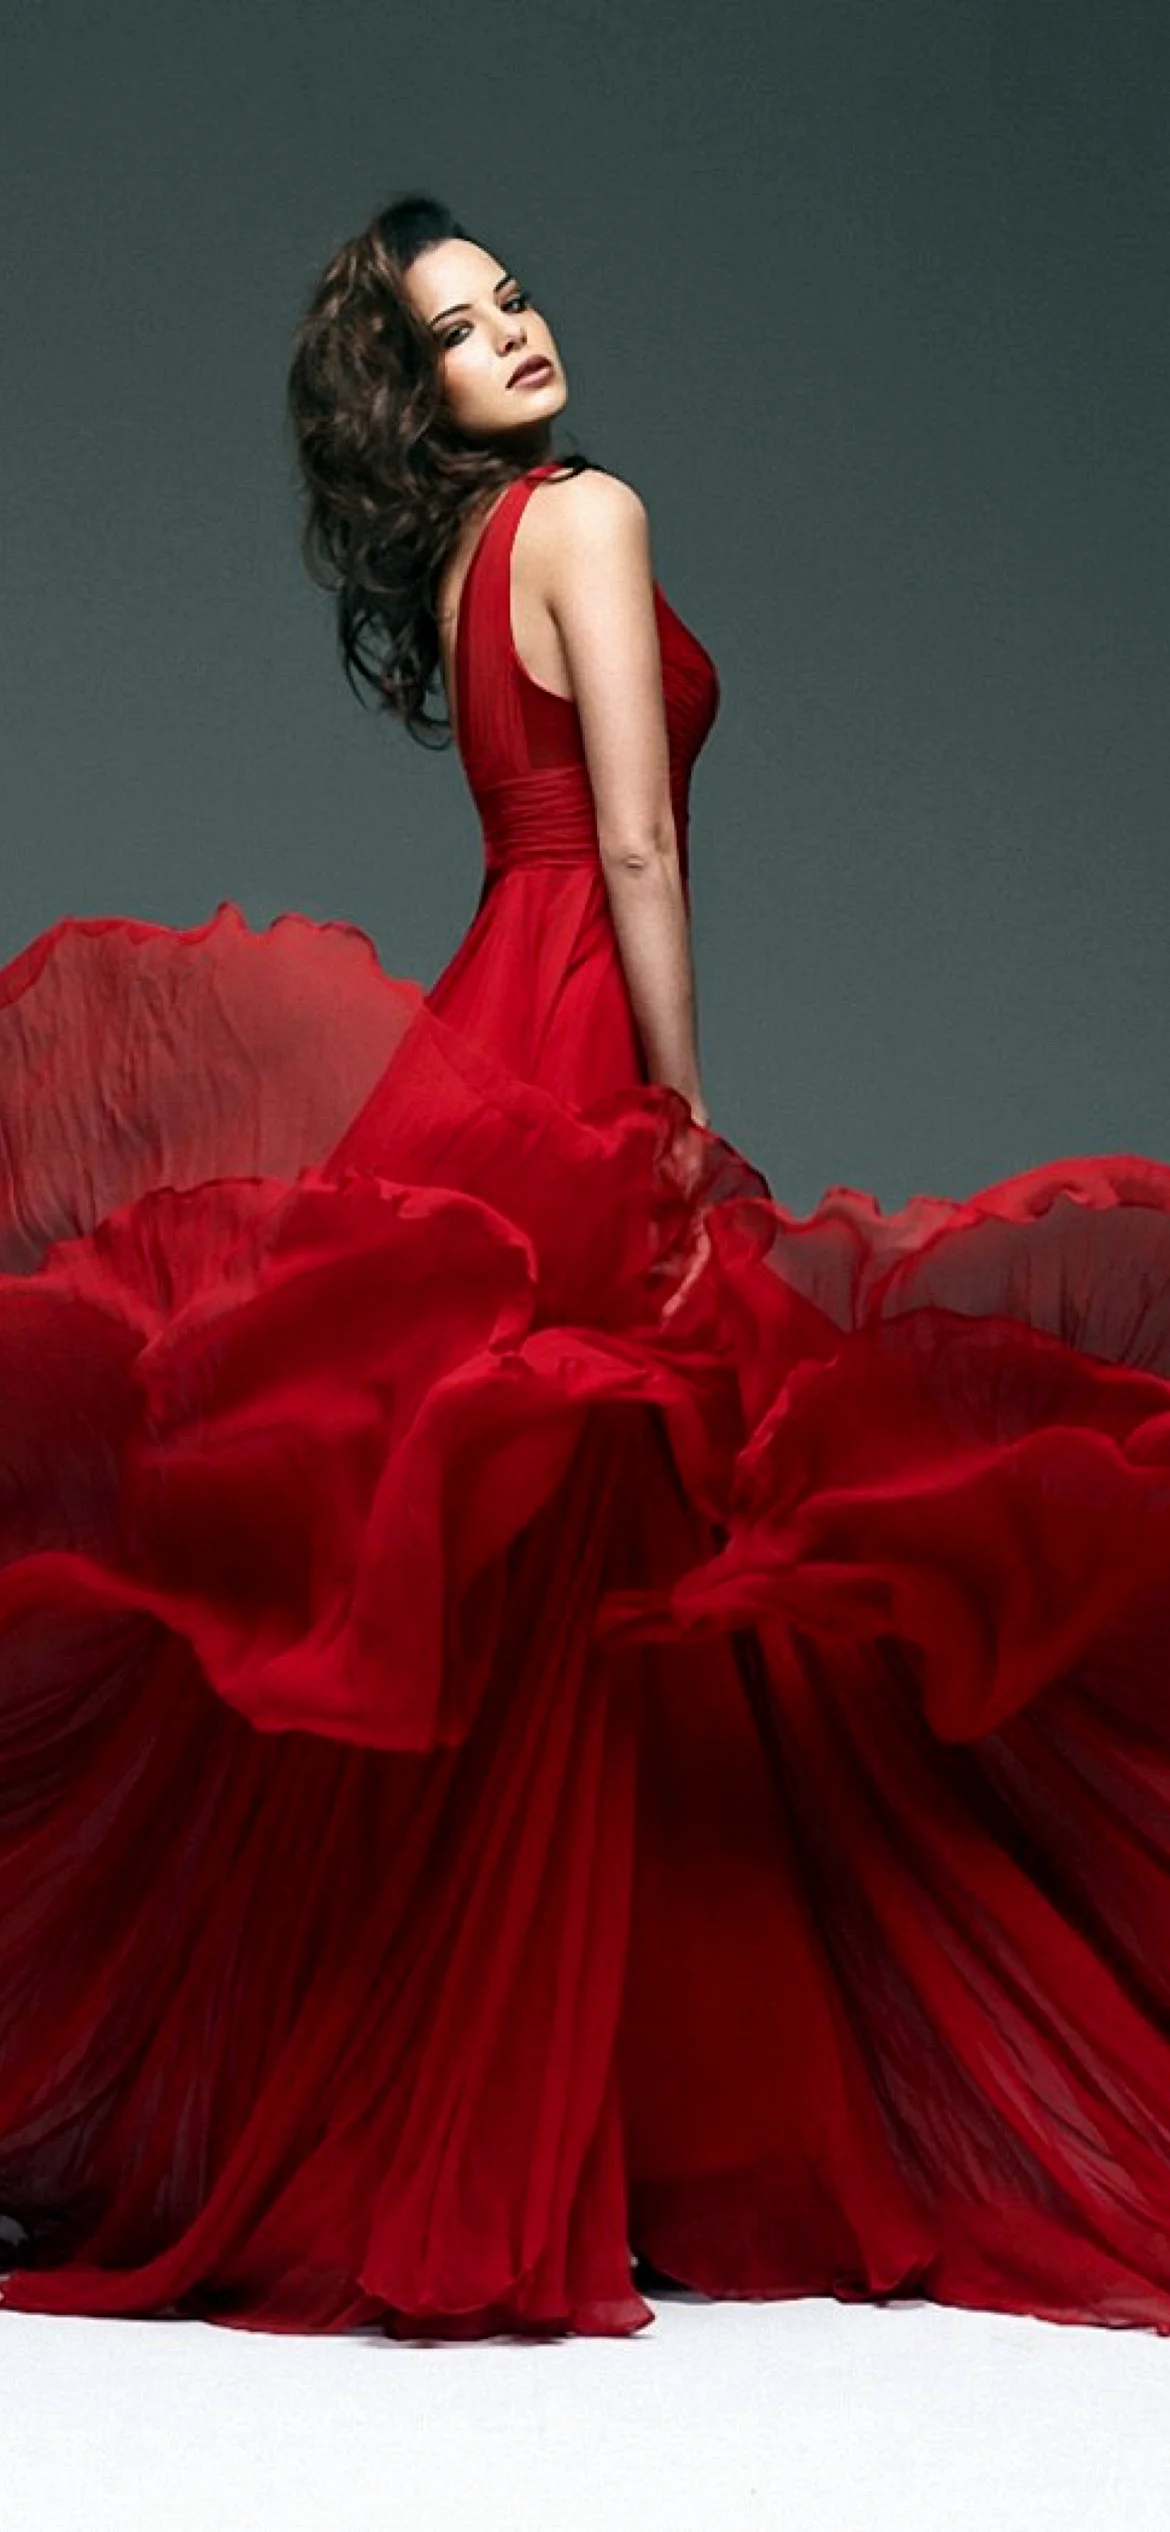 Red Dress Wallpaper for iPhone 13